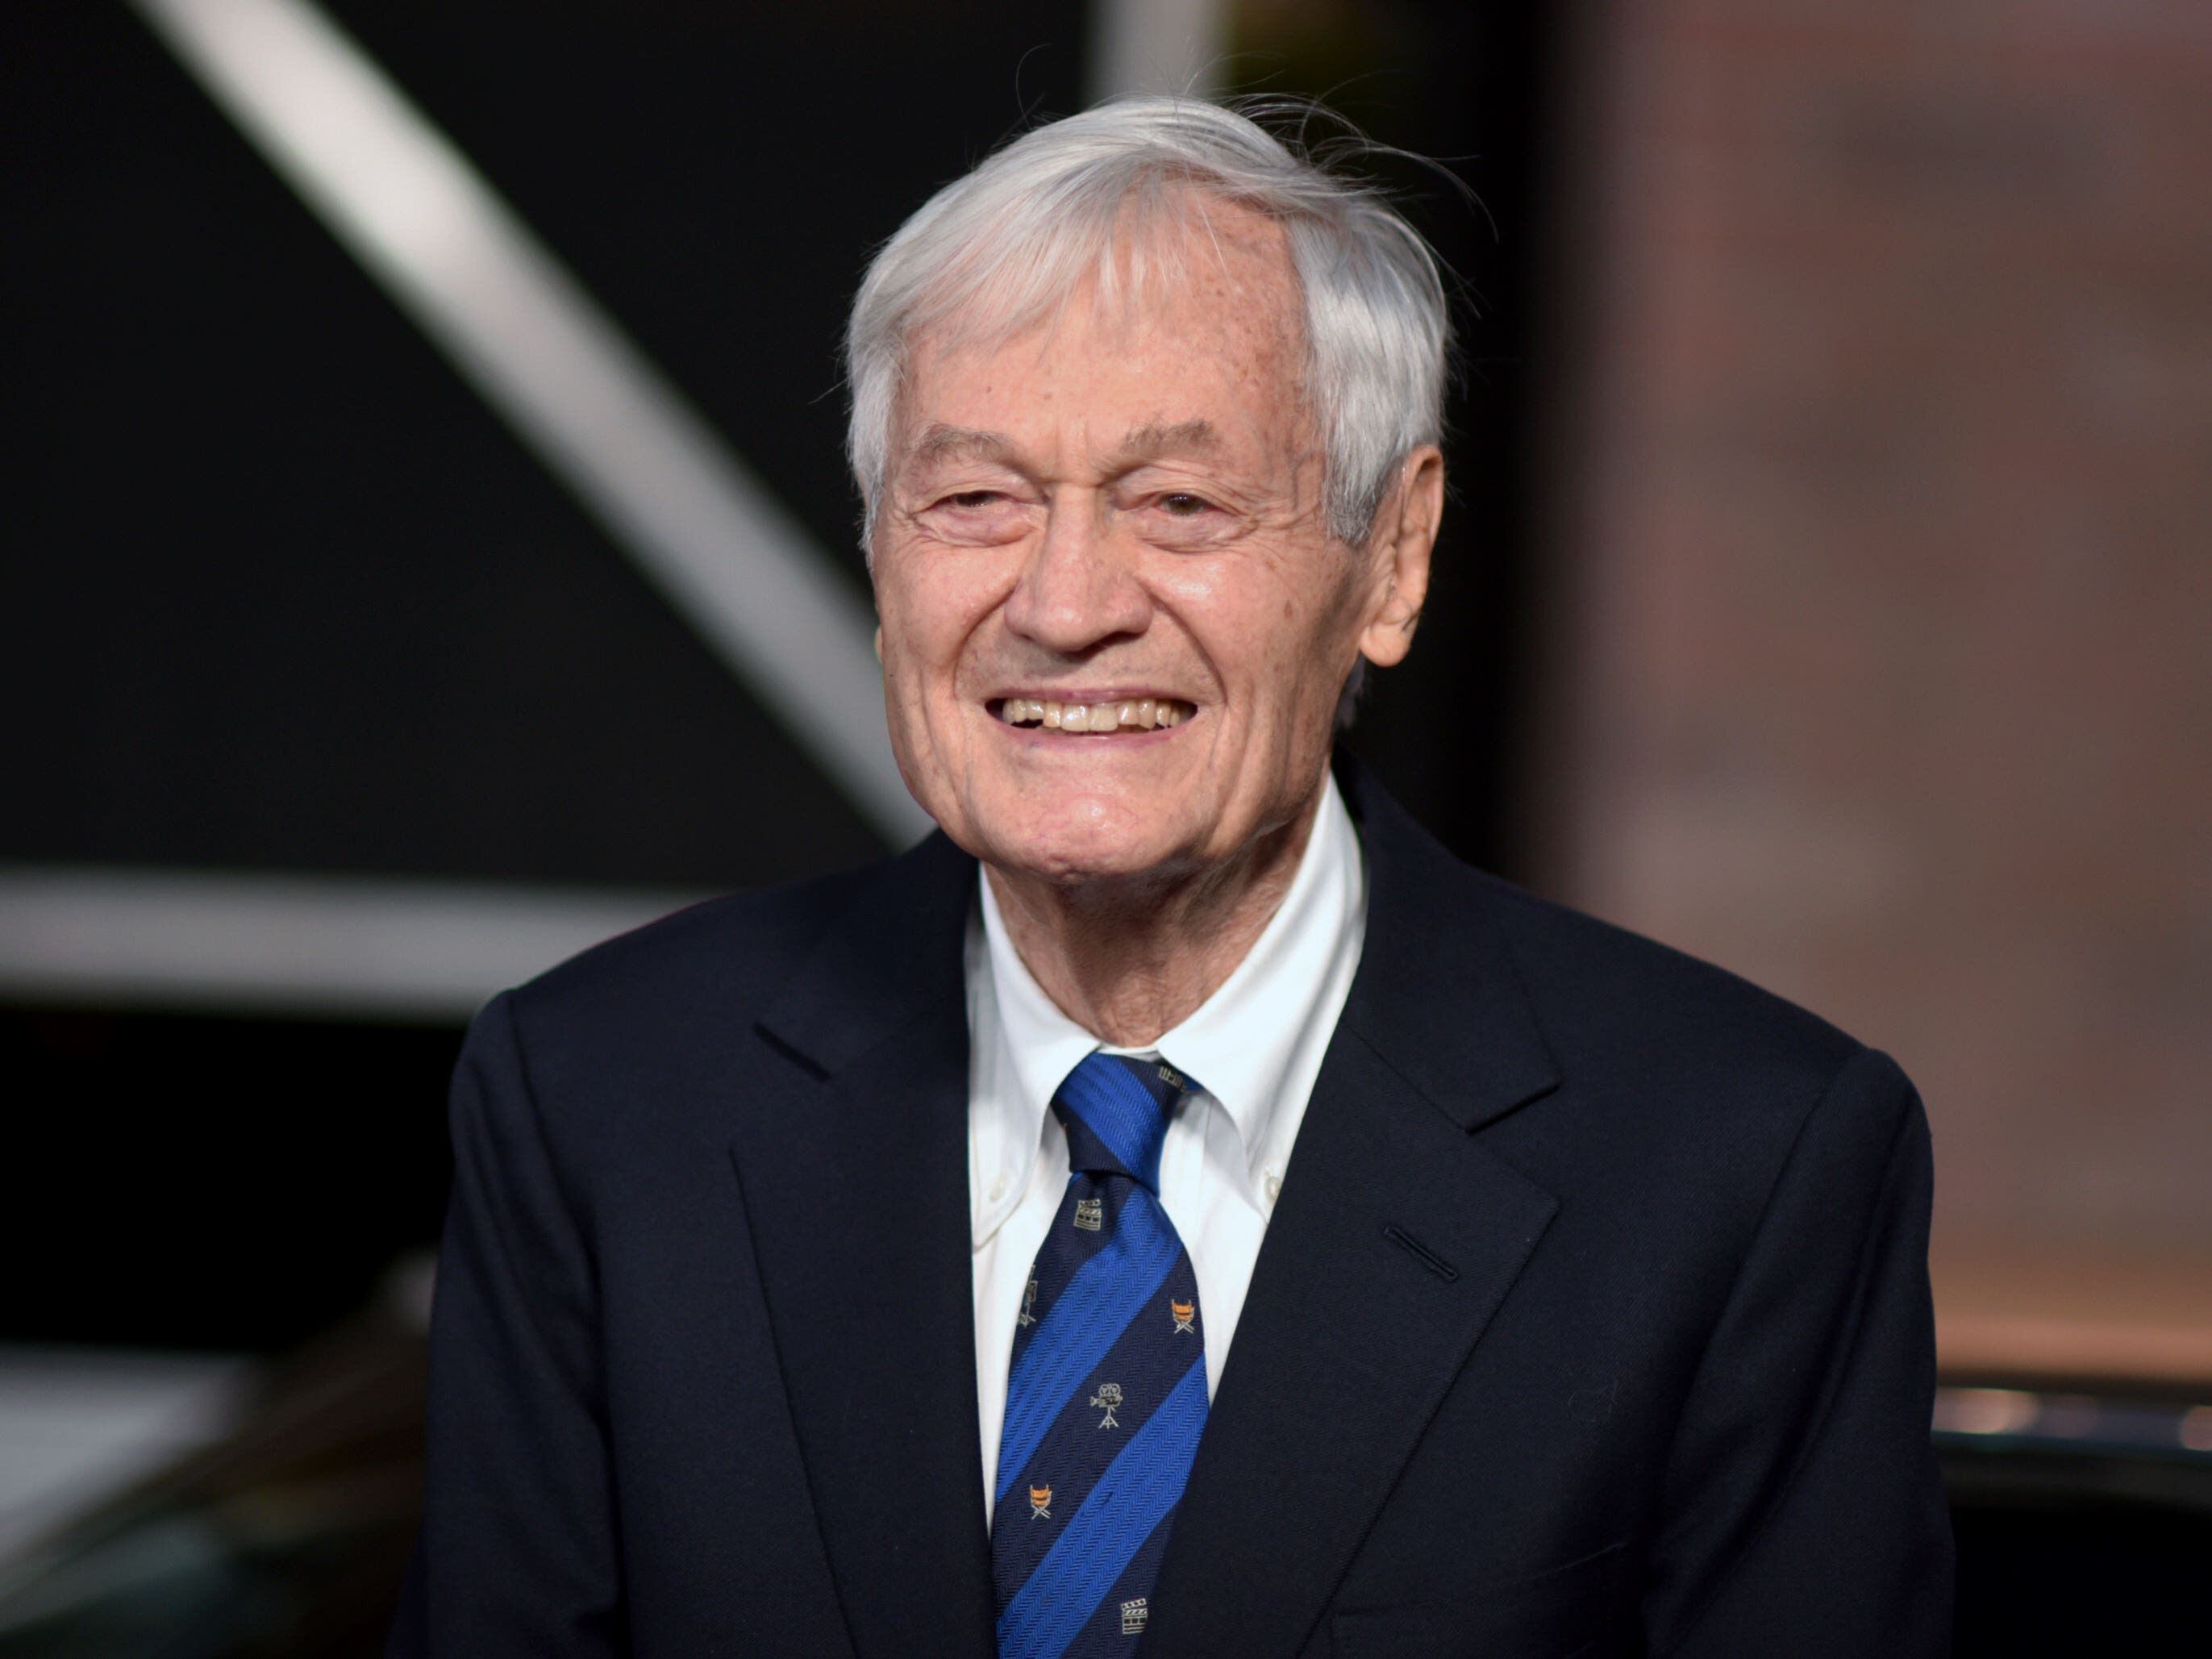 Roger Corman, Hollywood mentor and ‘King of the Bs’, dies aged 98